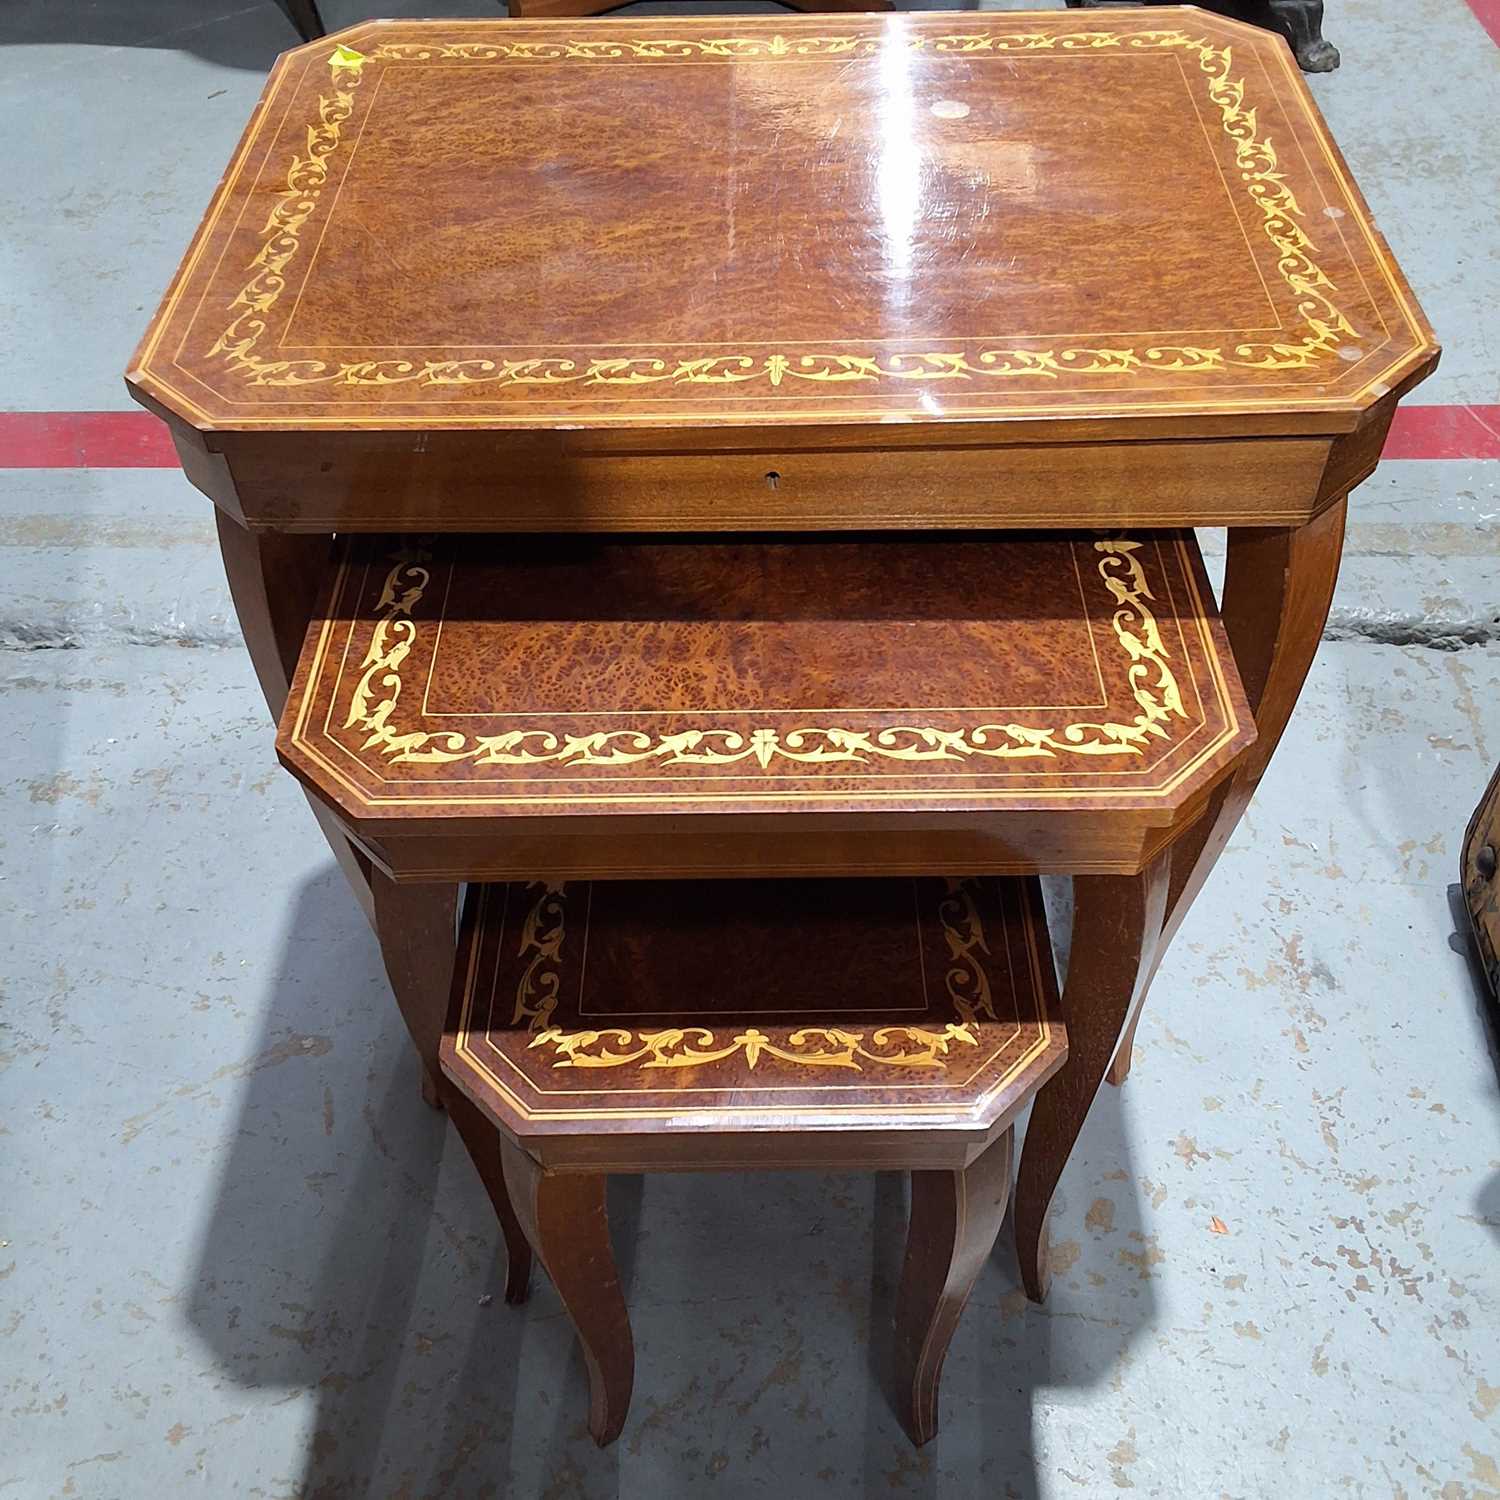 Lot 9 - NEST OF TABLES